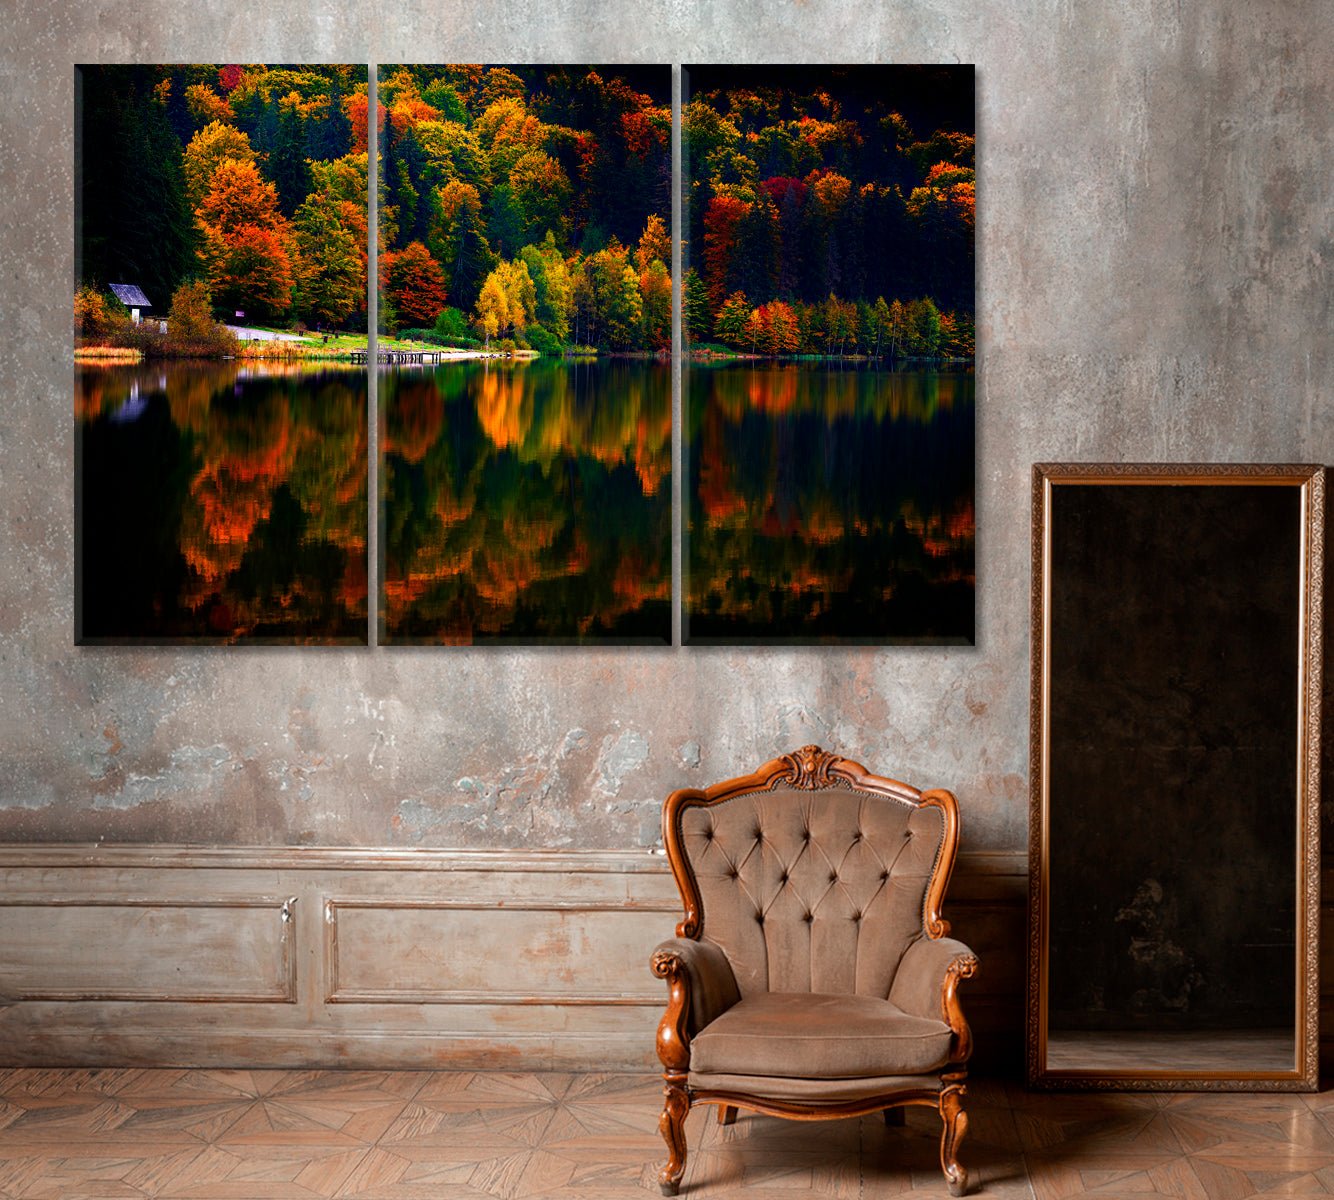 Autumn Landscape with Mountain and Lake Canvas Print ArtLexy 3 Panels 36"x24" inches 